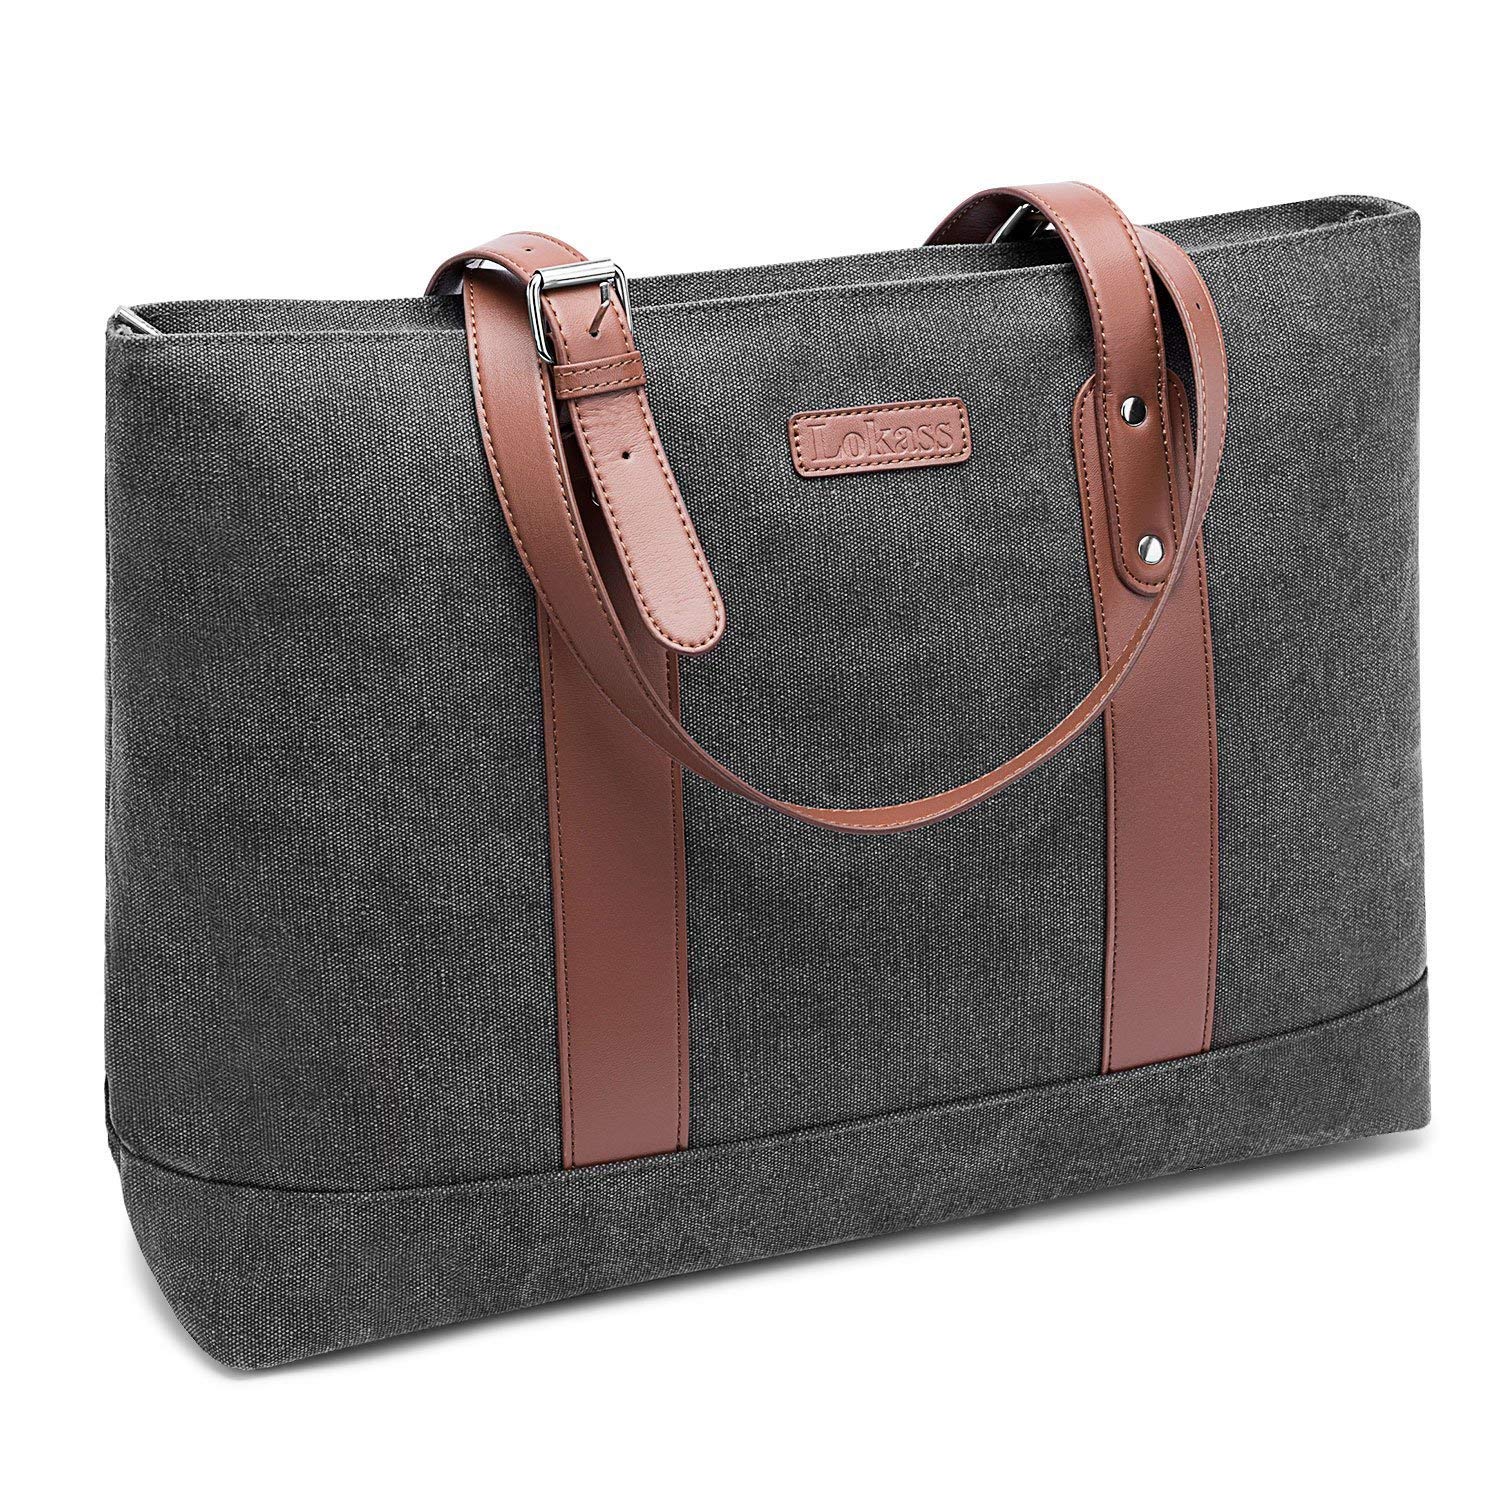 Dark Grey LOKASS 15.6 Inches Laptop Tote Bag Lightweight Canvas Briefcase Shoulder Bag Classic Casual Office Handbag for Woman